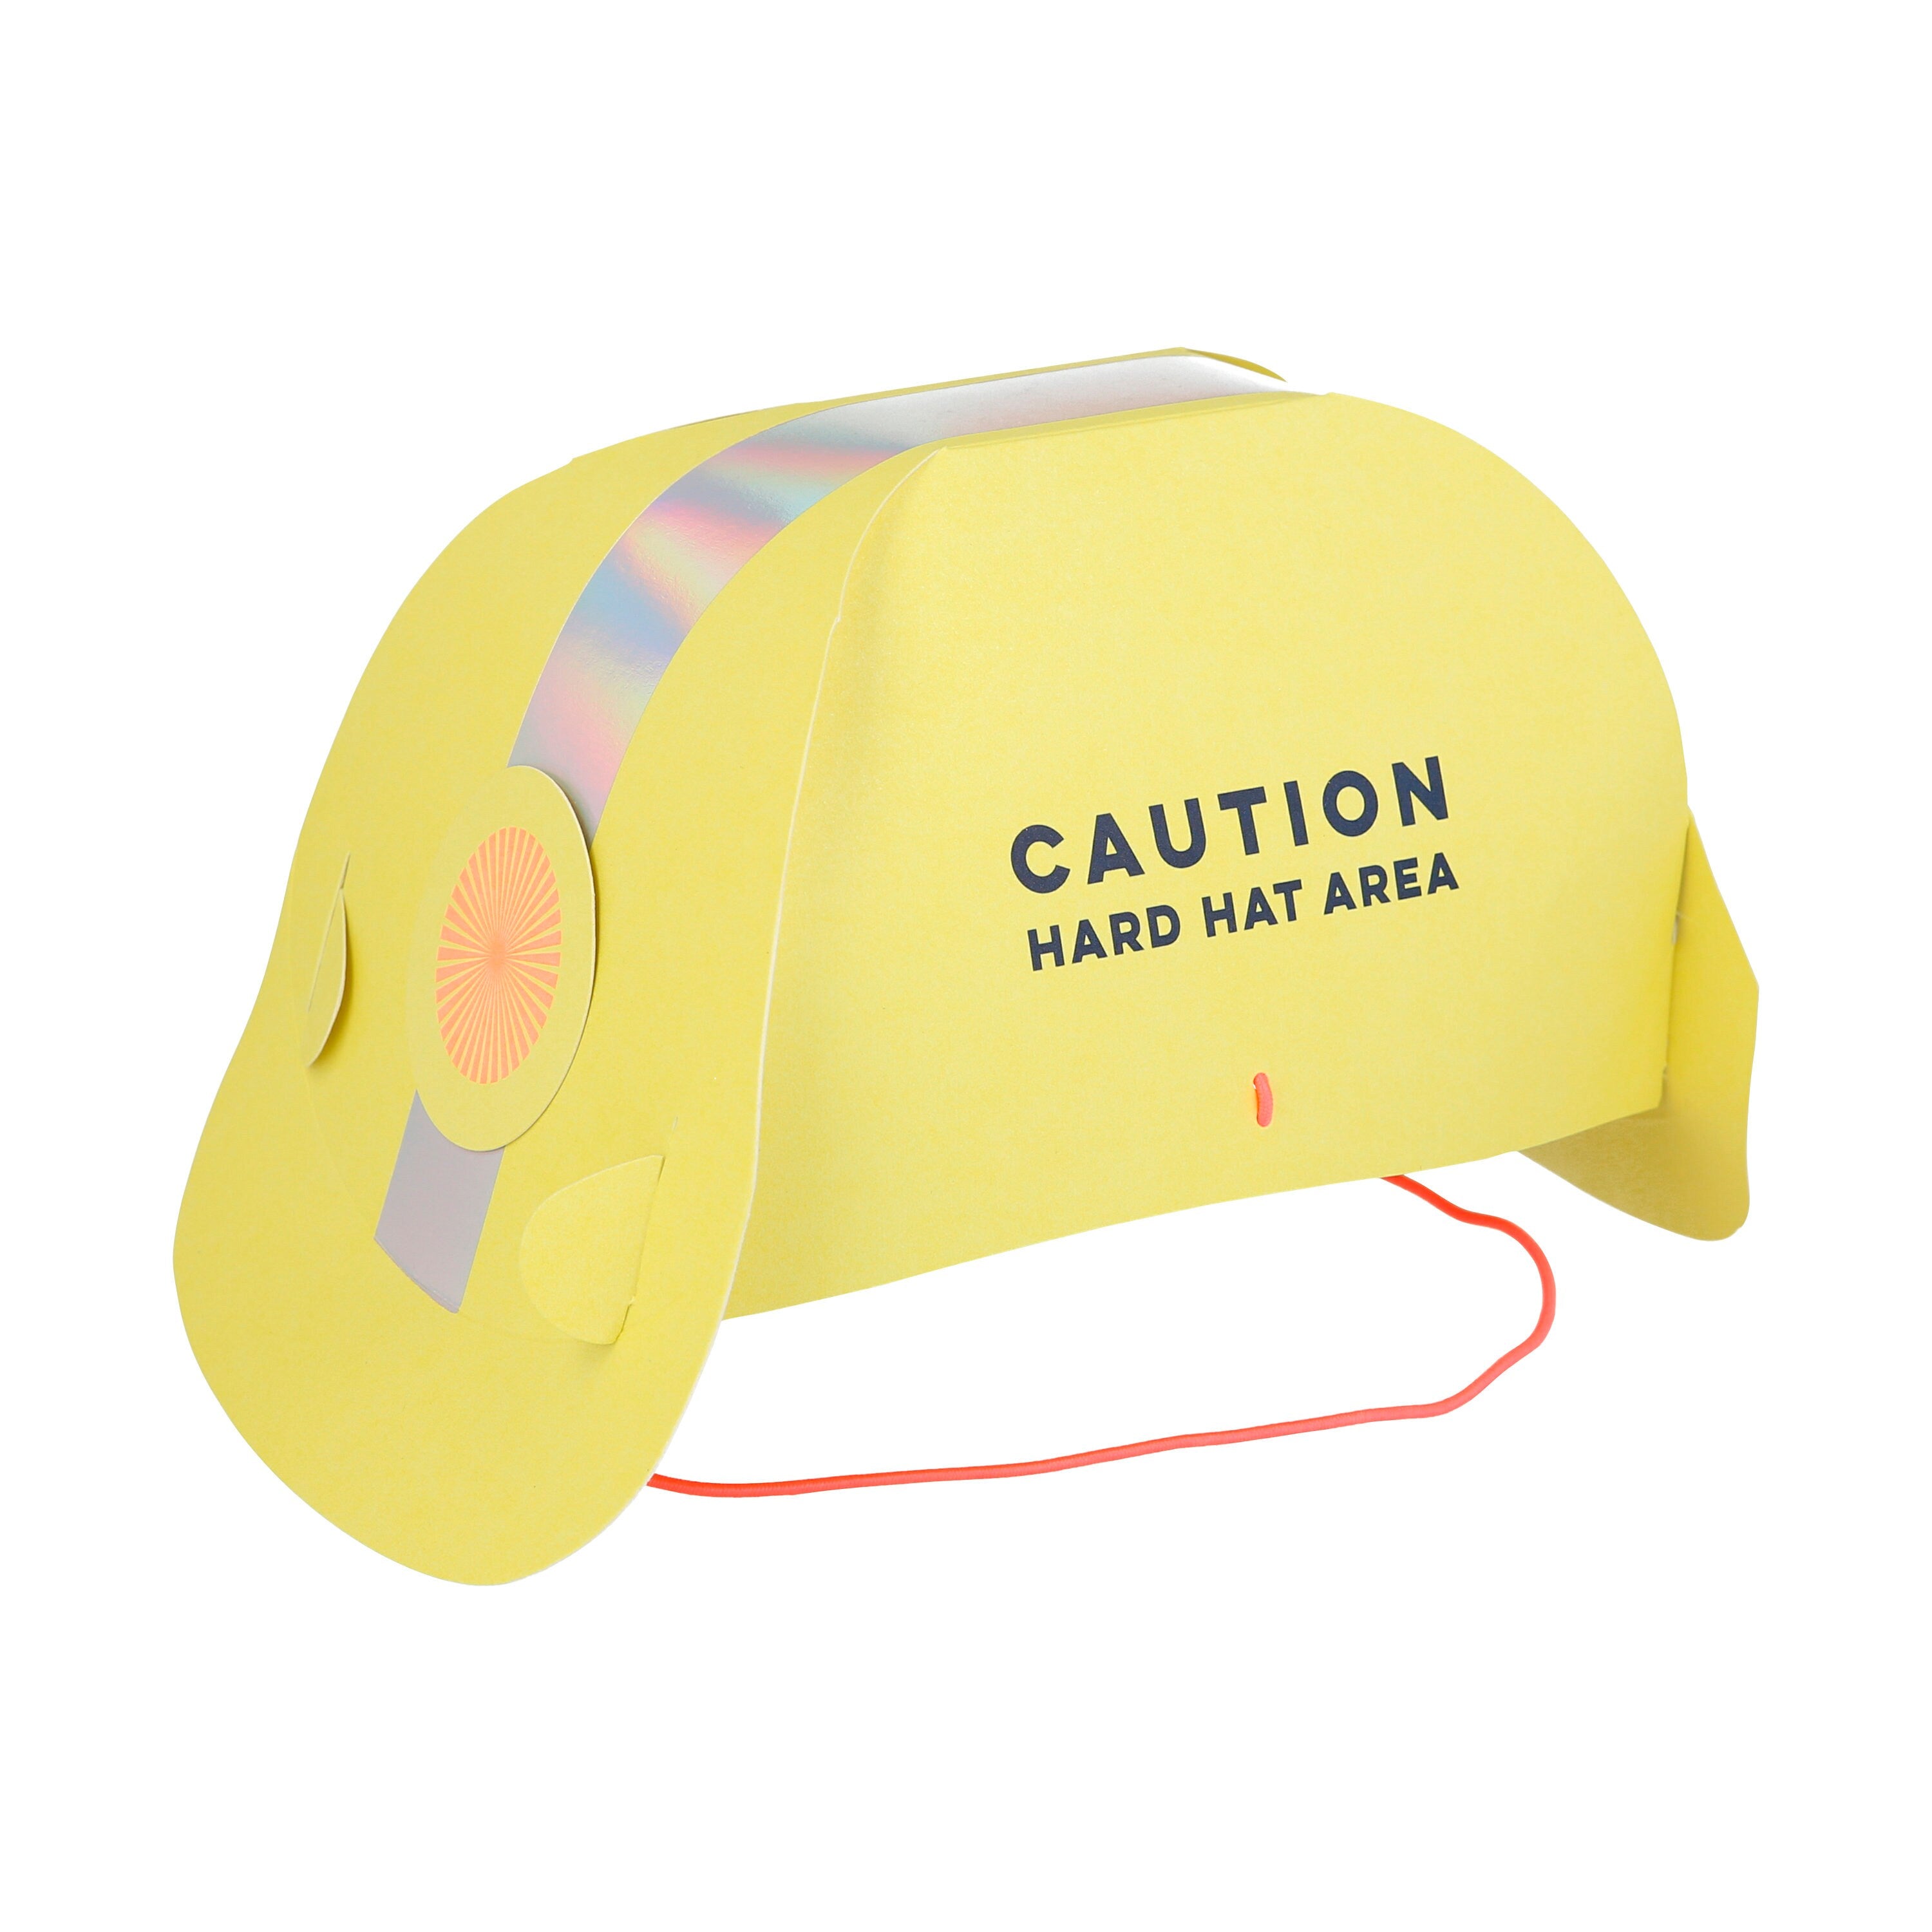 Hard Hats for Kids | Construction Party - Construction Birthday Party - Construction Theme Party - Construction Party Favor - Child Hard Hat